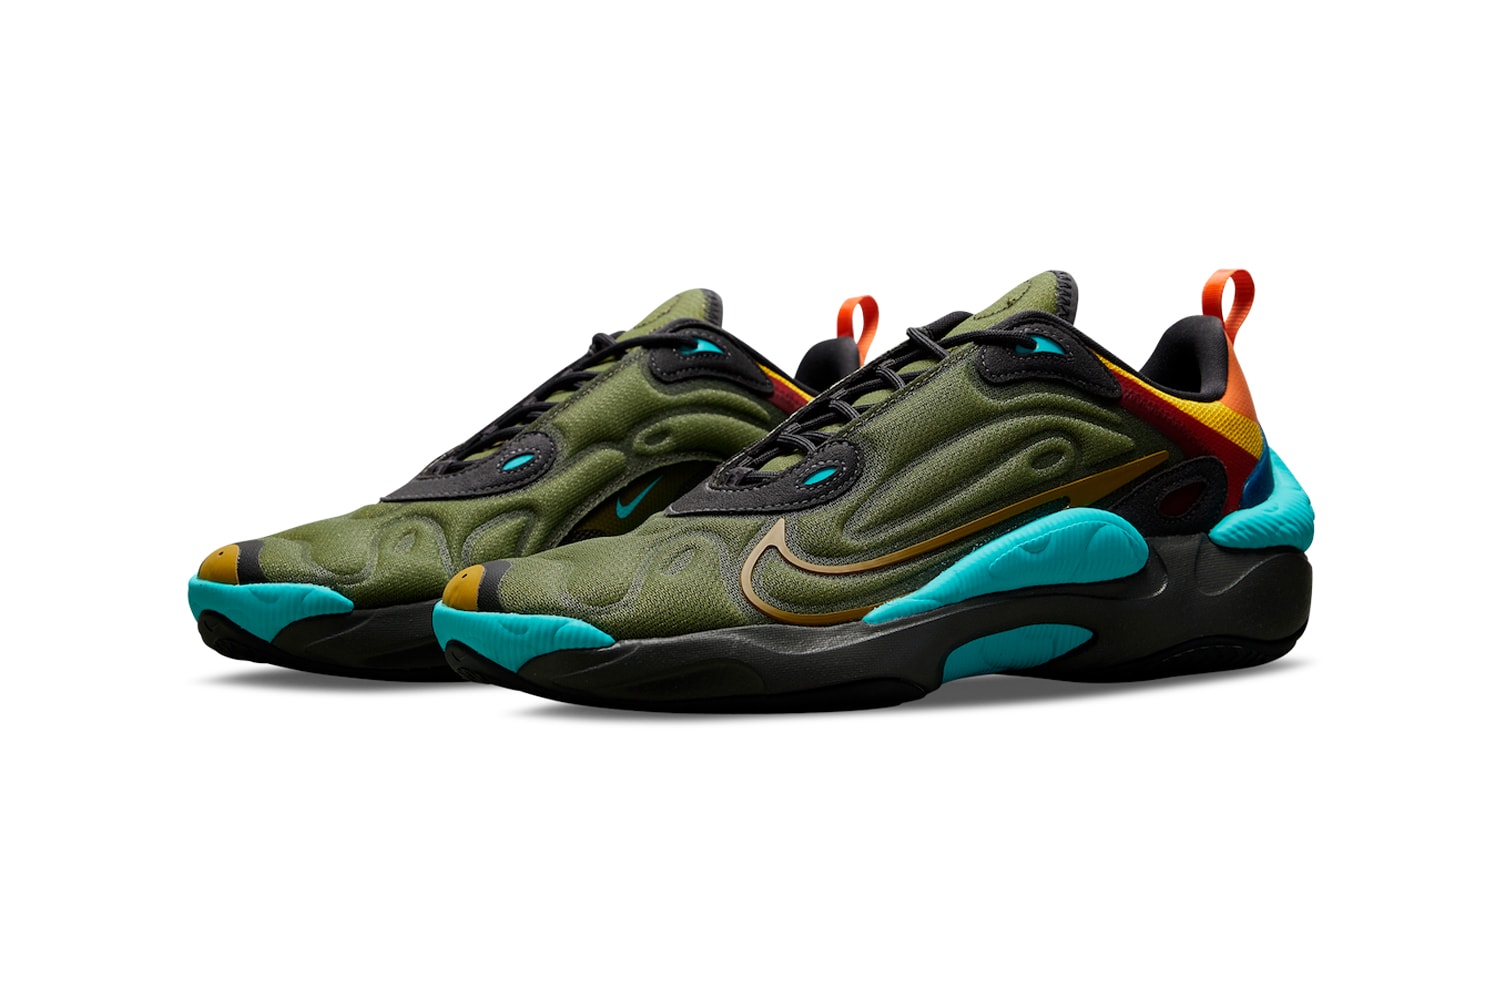 Nike React Atlas Olive Aqua Official Look Release Info DH7598-300 Date Buy Price 